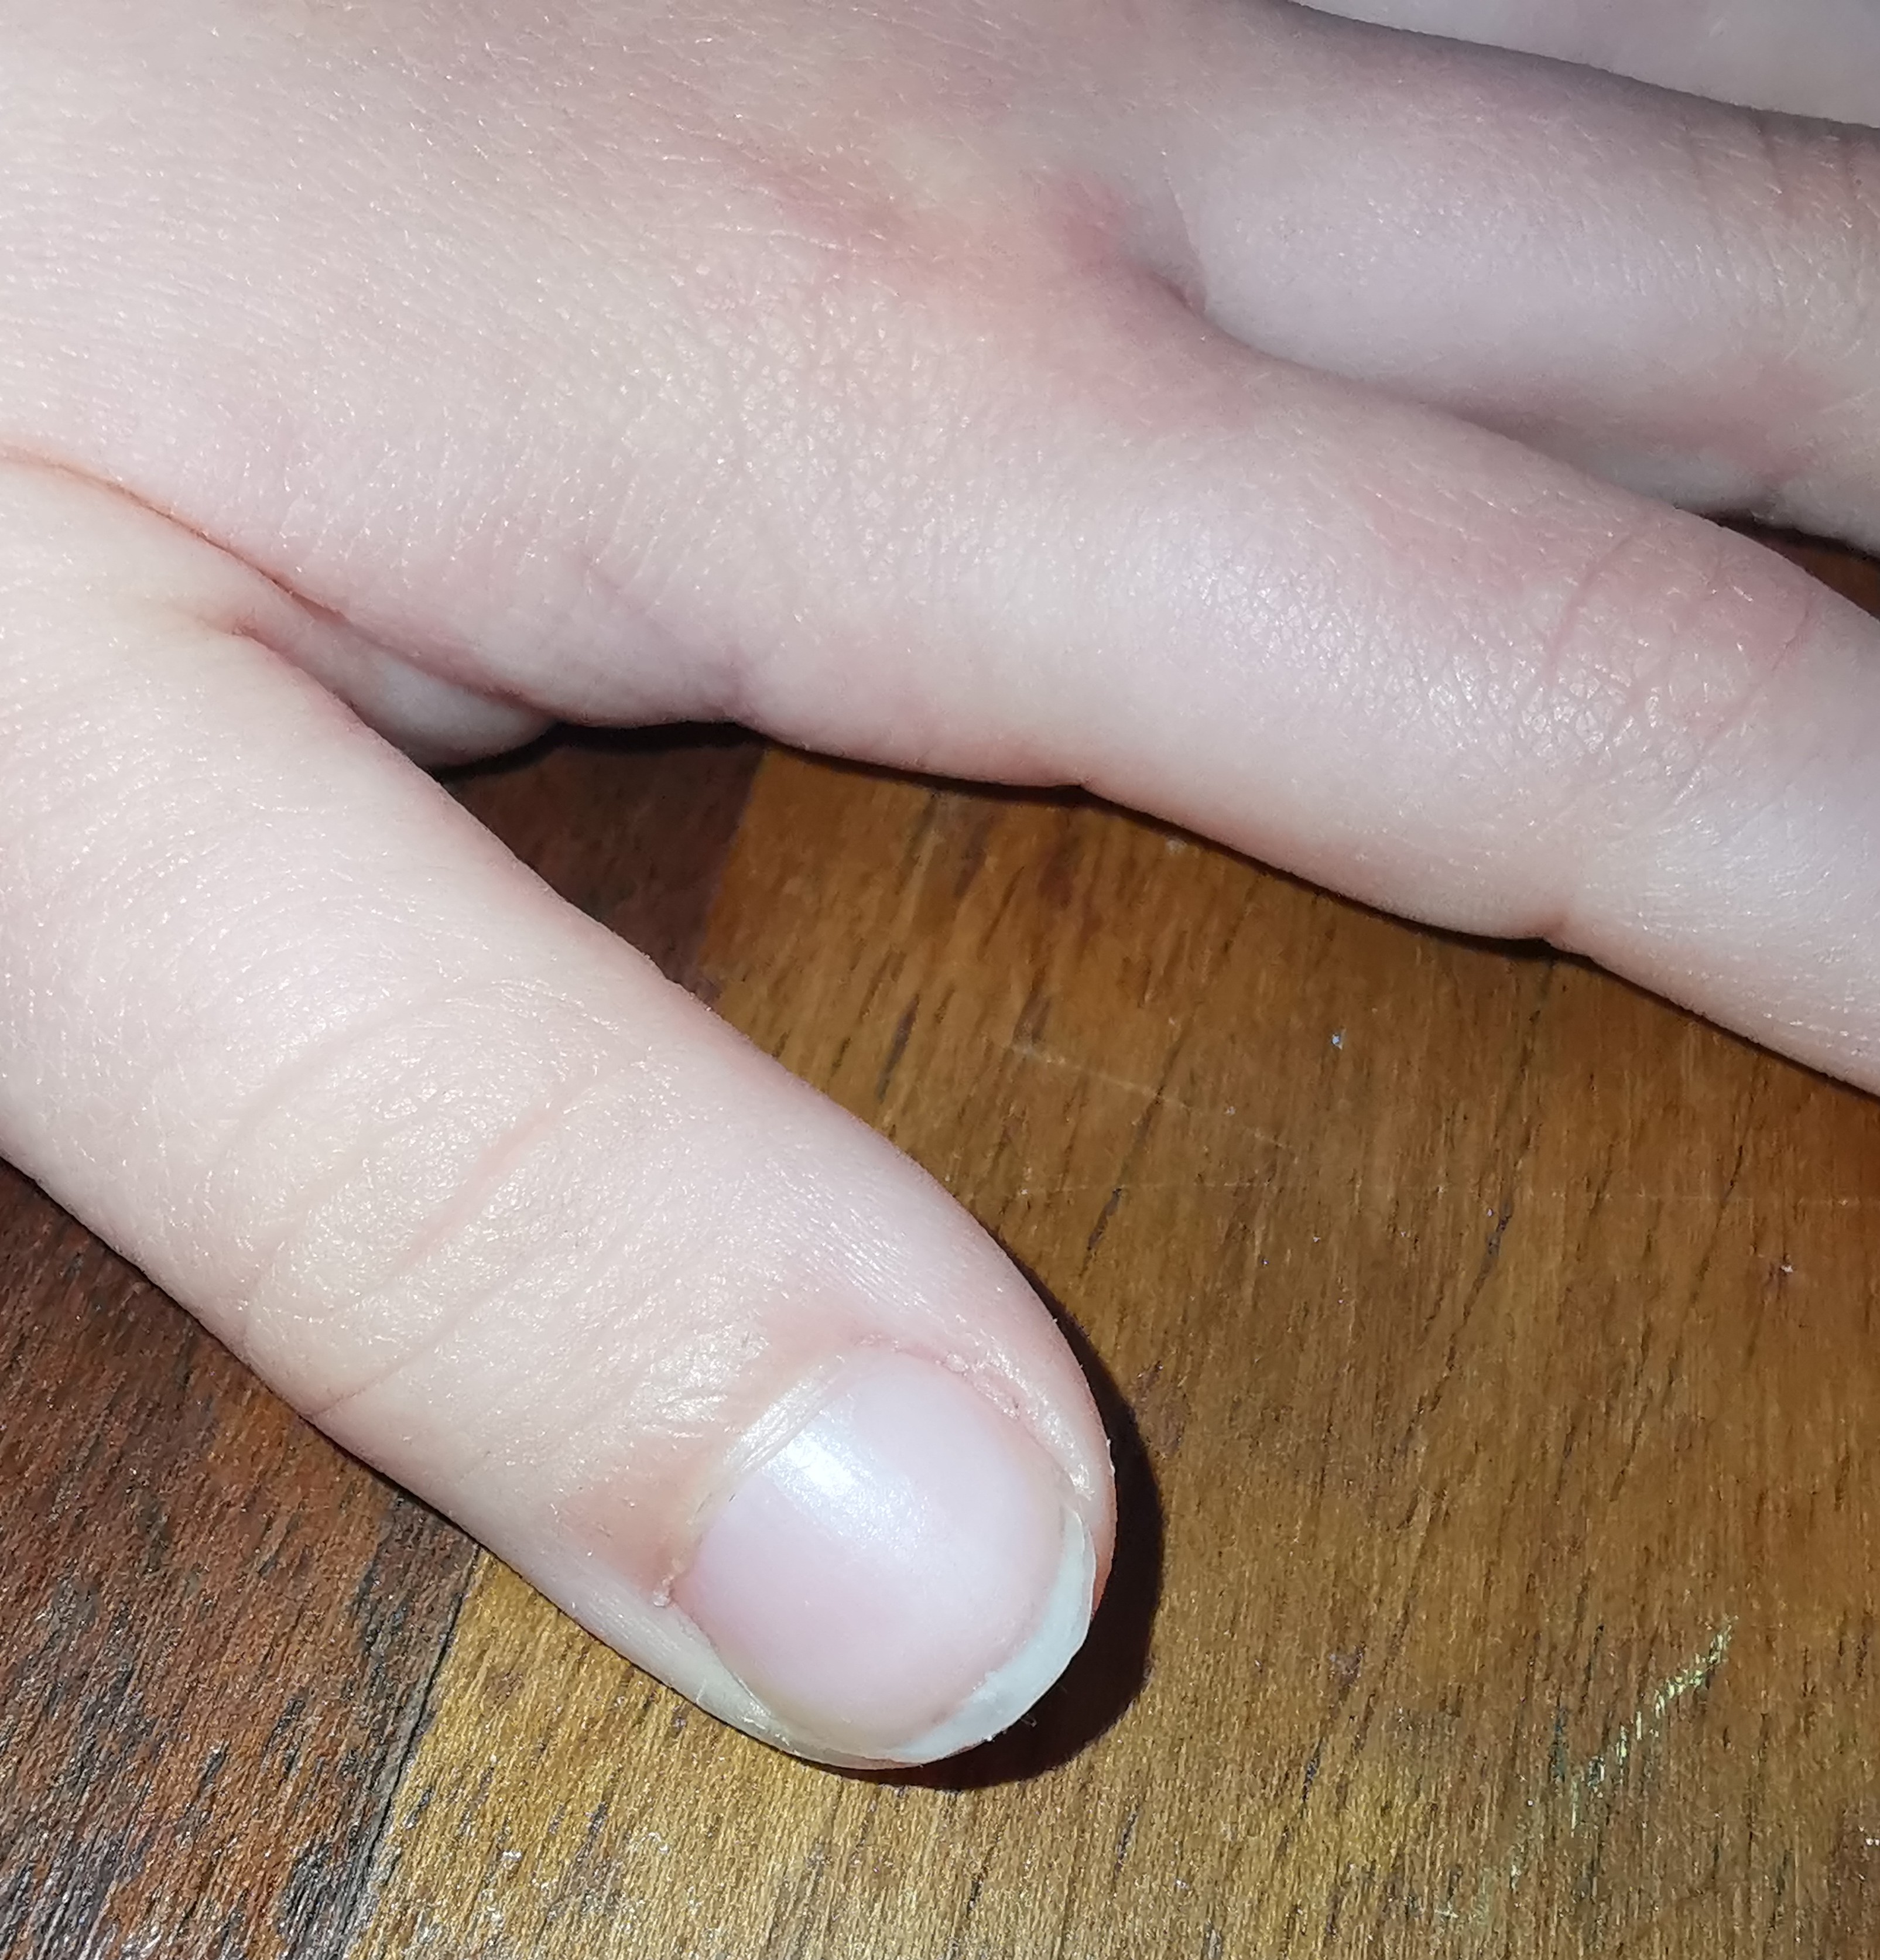 Woman With a Faint Line in Her Finger Nail Discovers She Has Melanoma